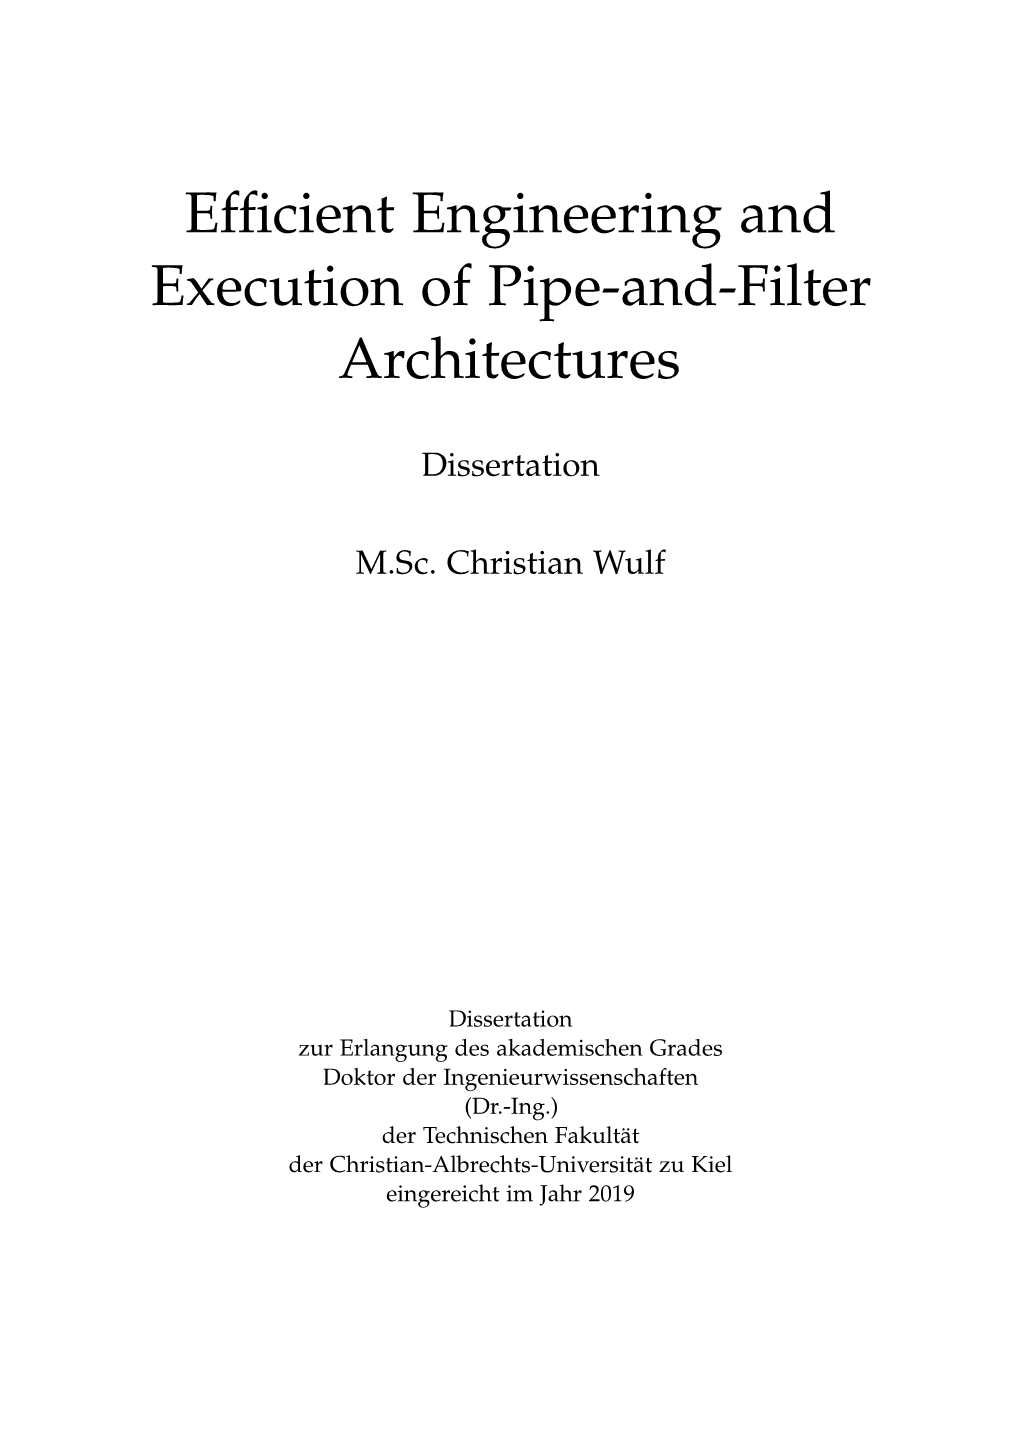 Efficient Engineering and Execution of Pipe-And-Filter Architectures